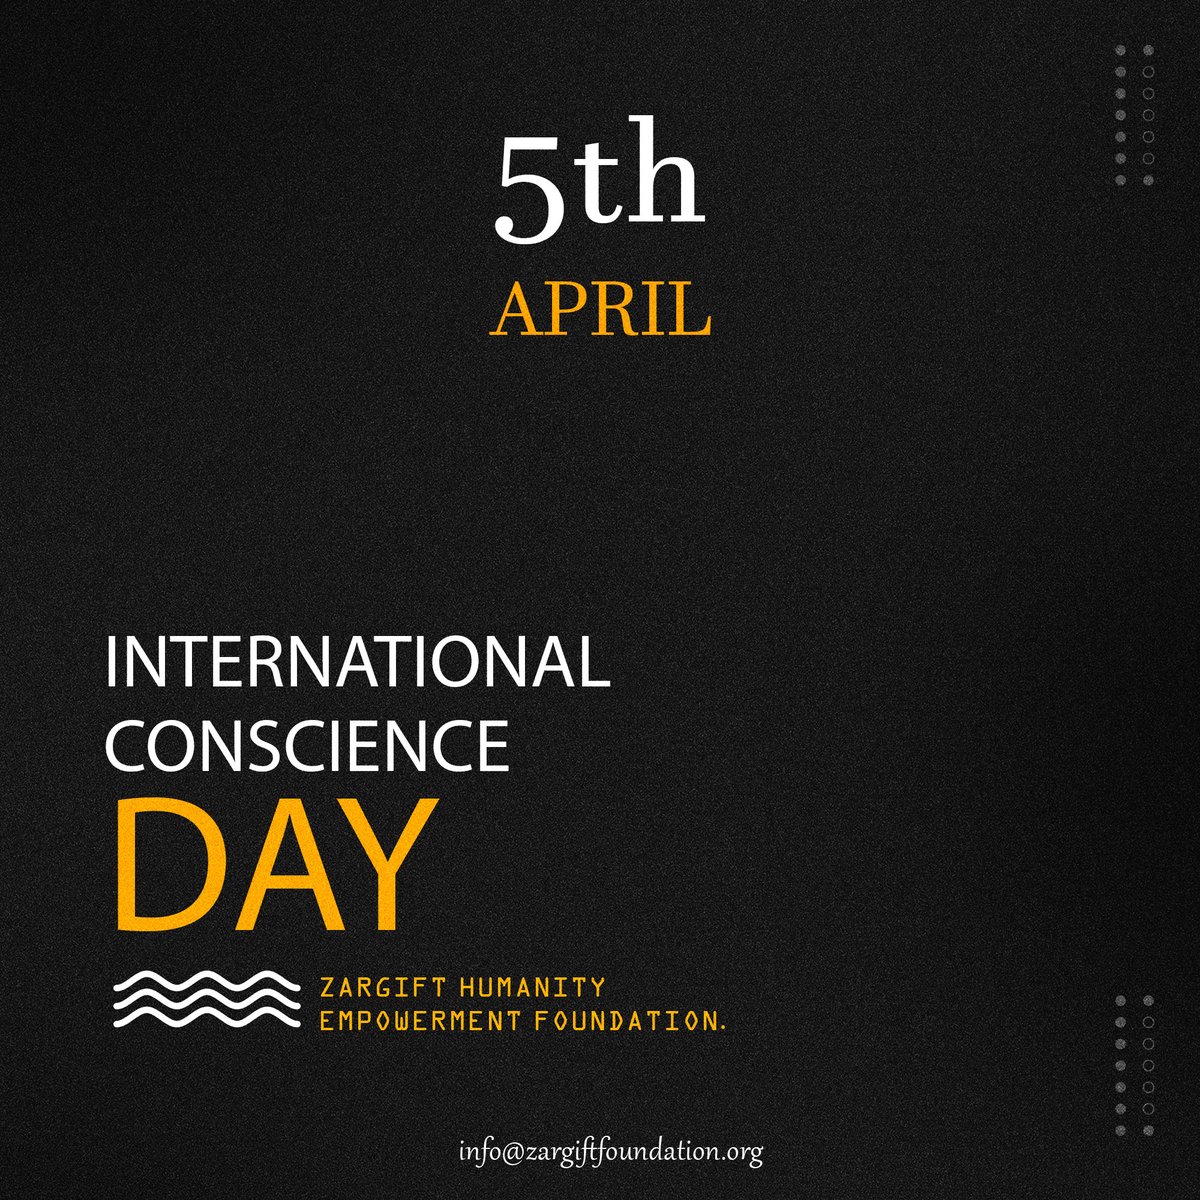 Today, we celebrate International Conscience Day, a reminder to listen to our inner moral compass and strive for empathy, compassion, and justice in all our actions. Let's make choices that contribute to a more harmonious world. #InternationalConscienceDay #Empathy #Compassion